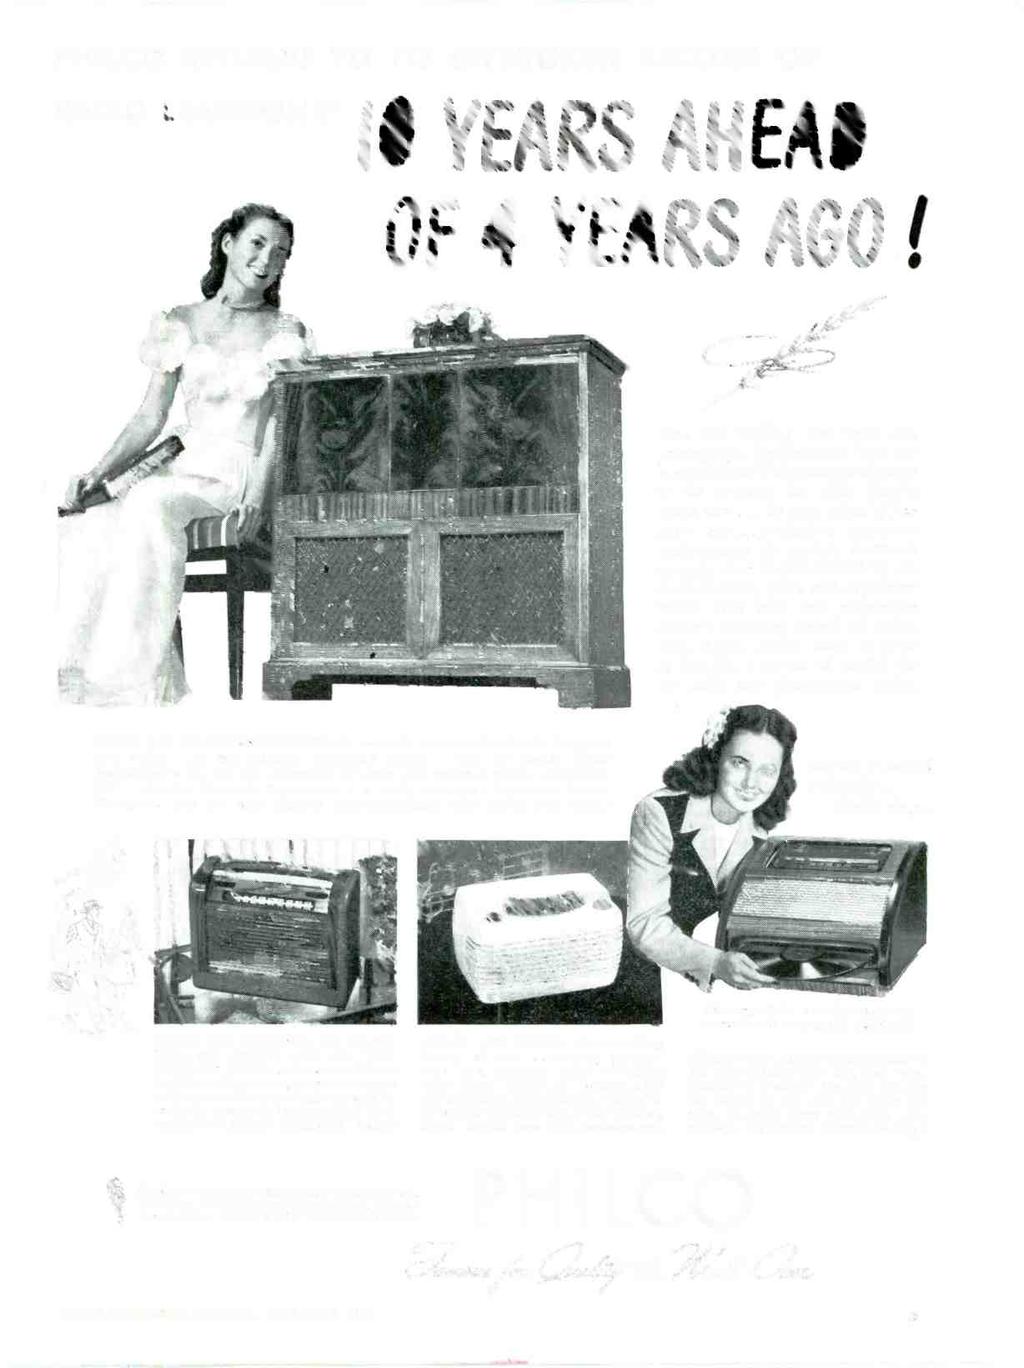 PHILCO RETURNS TO ITS UNBROKEN RECORD OF RADIO ADE L E R S H I P 10 YEARS AHEAD OF 4 YEARS AGO I Yes, the thrilling new radio and phonograph developments from the laboratories of Philco are the big